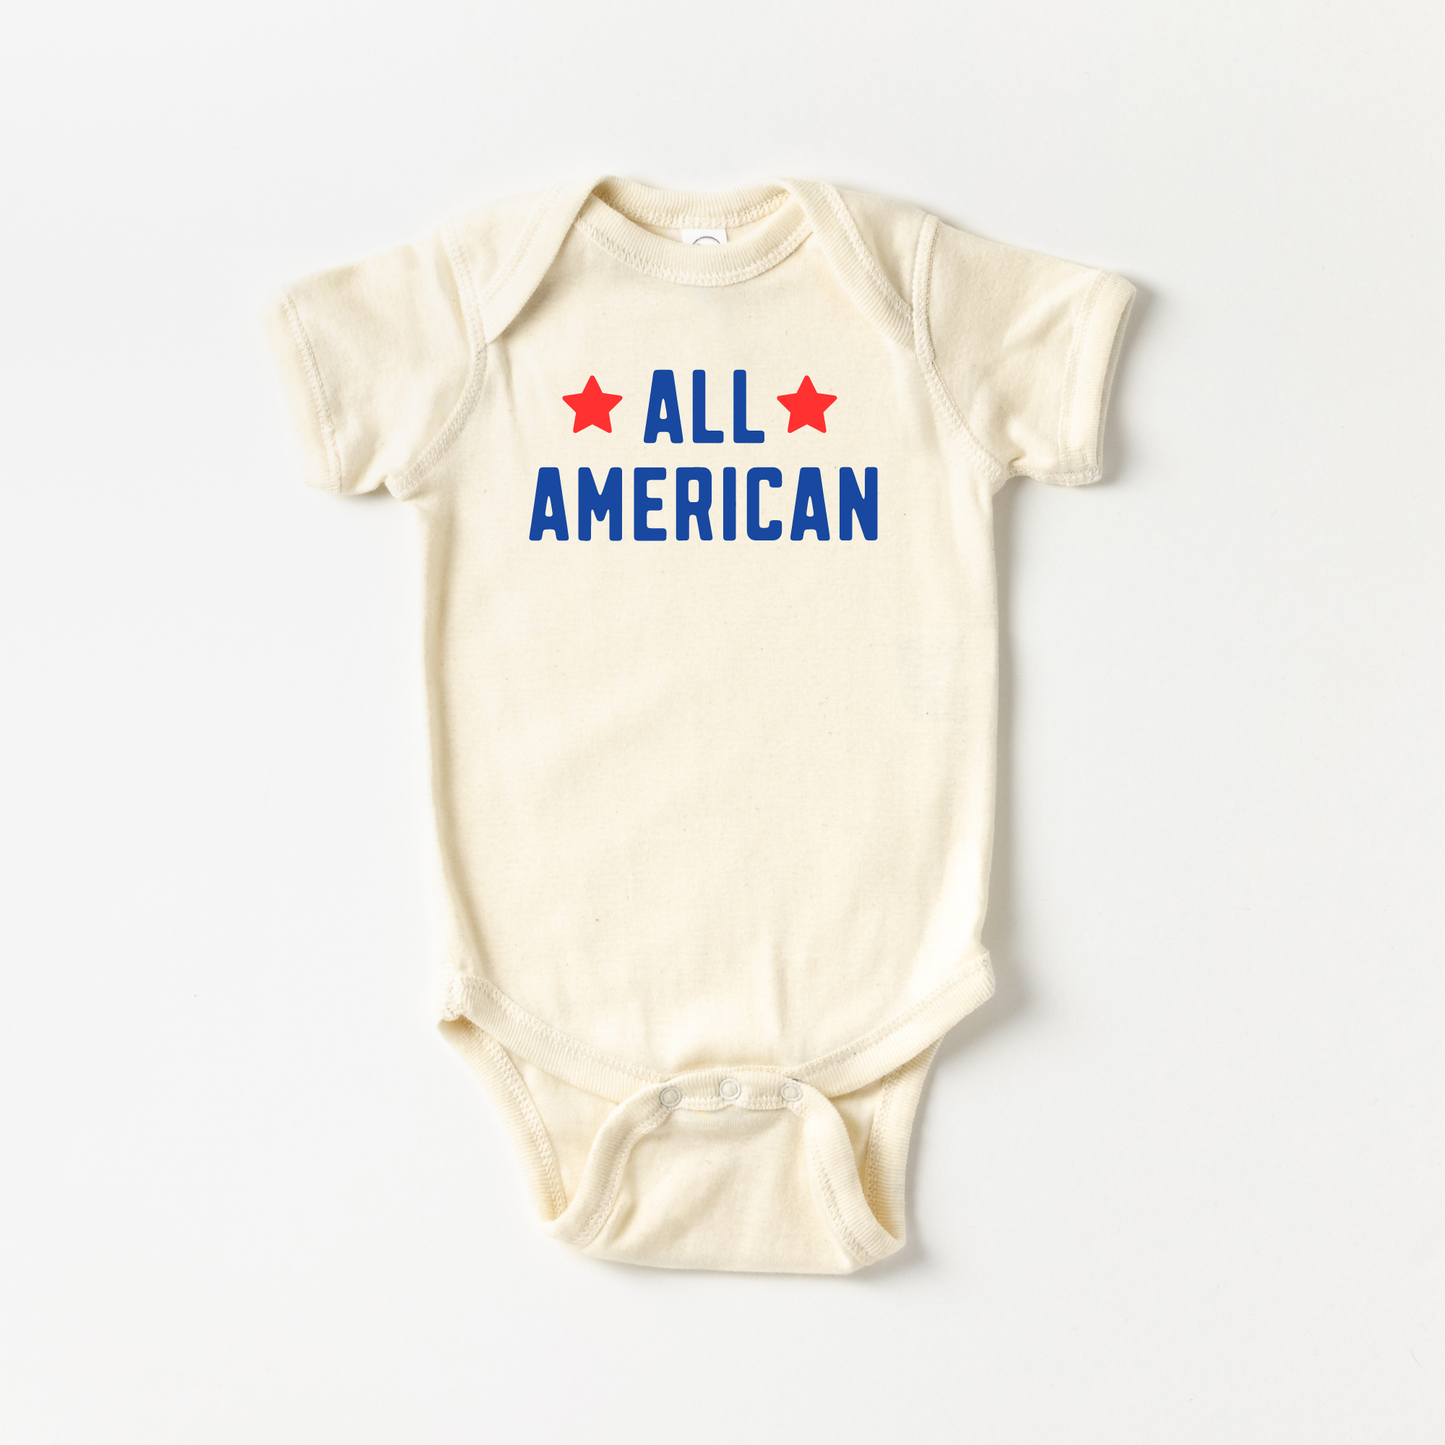 All American Infant One piece Body Suit